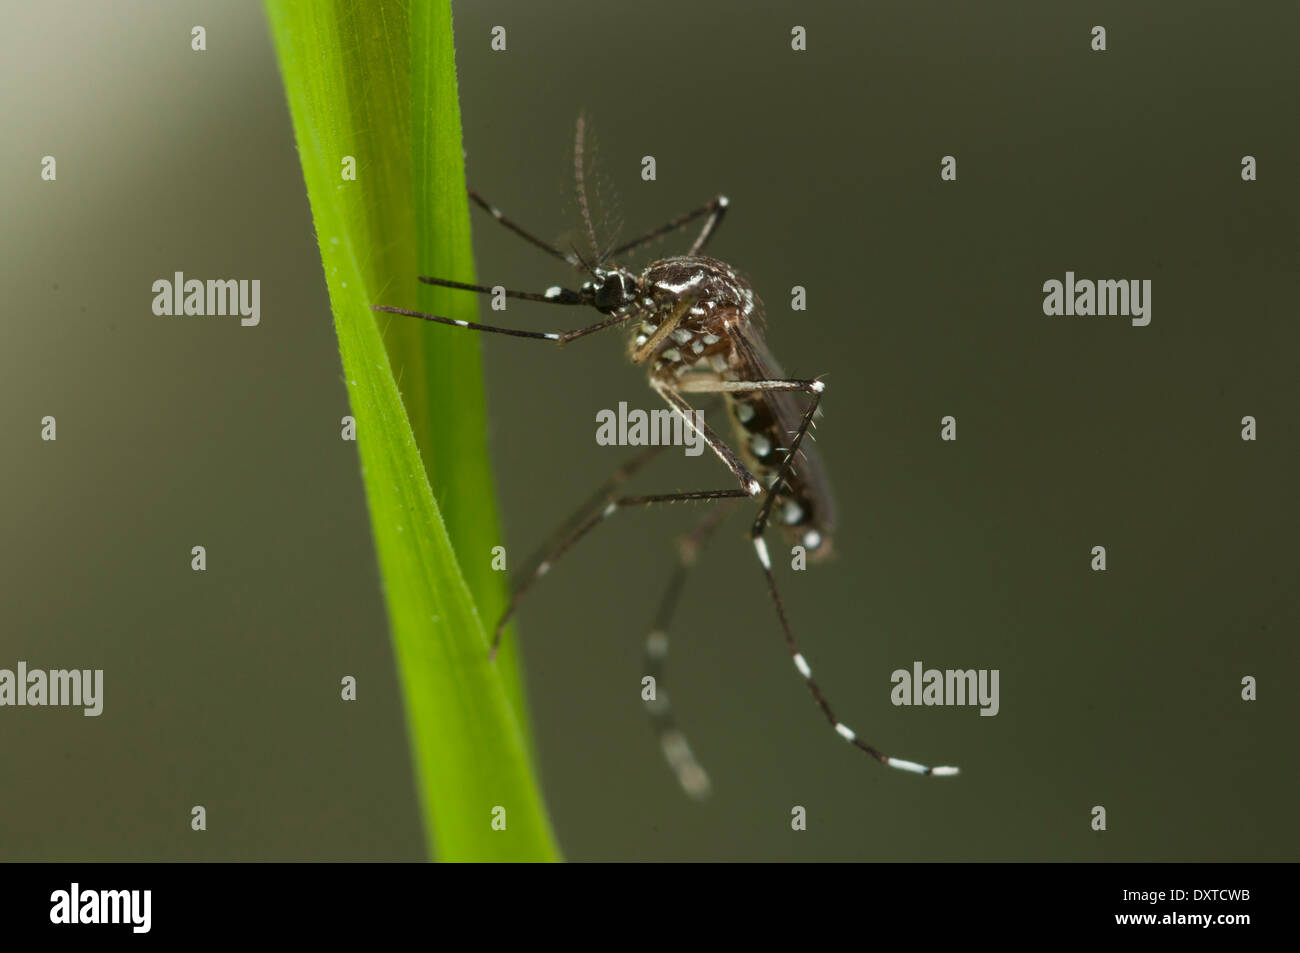 Aedes aegypti female resting into vegetation. One of the most common mosquito species worldwide, invasive to Europe in the past and carrier of Dengue, Yellow Fever and other diseases. Stock Photo